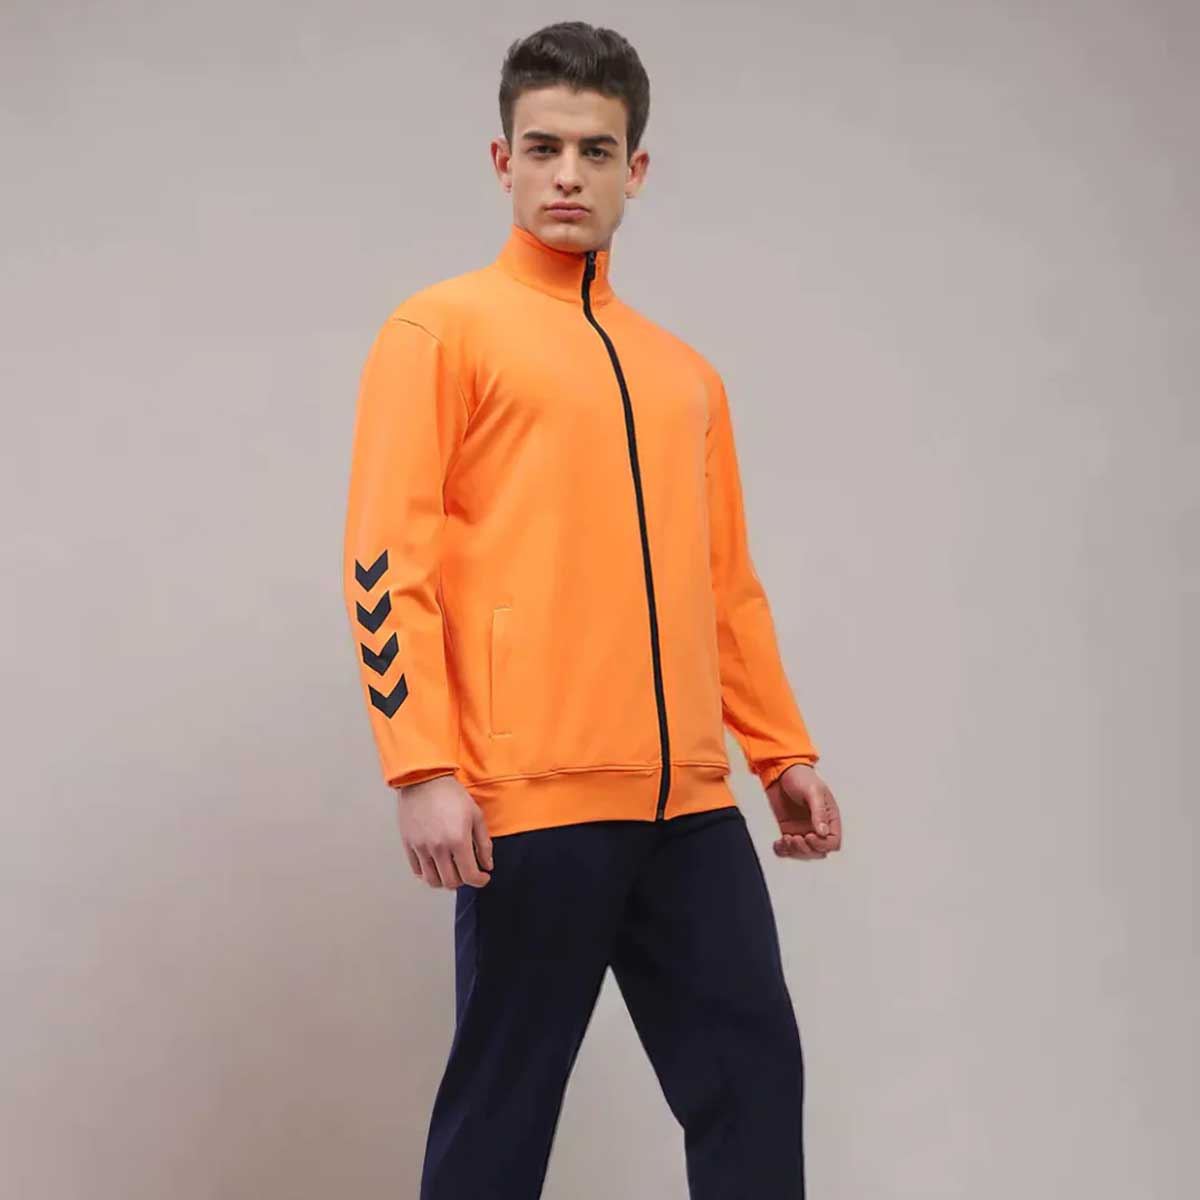 Promotional Tracksuits Manufacturers in Chandler